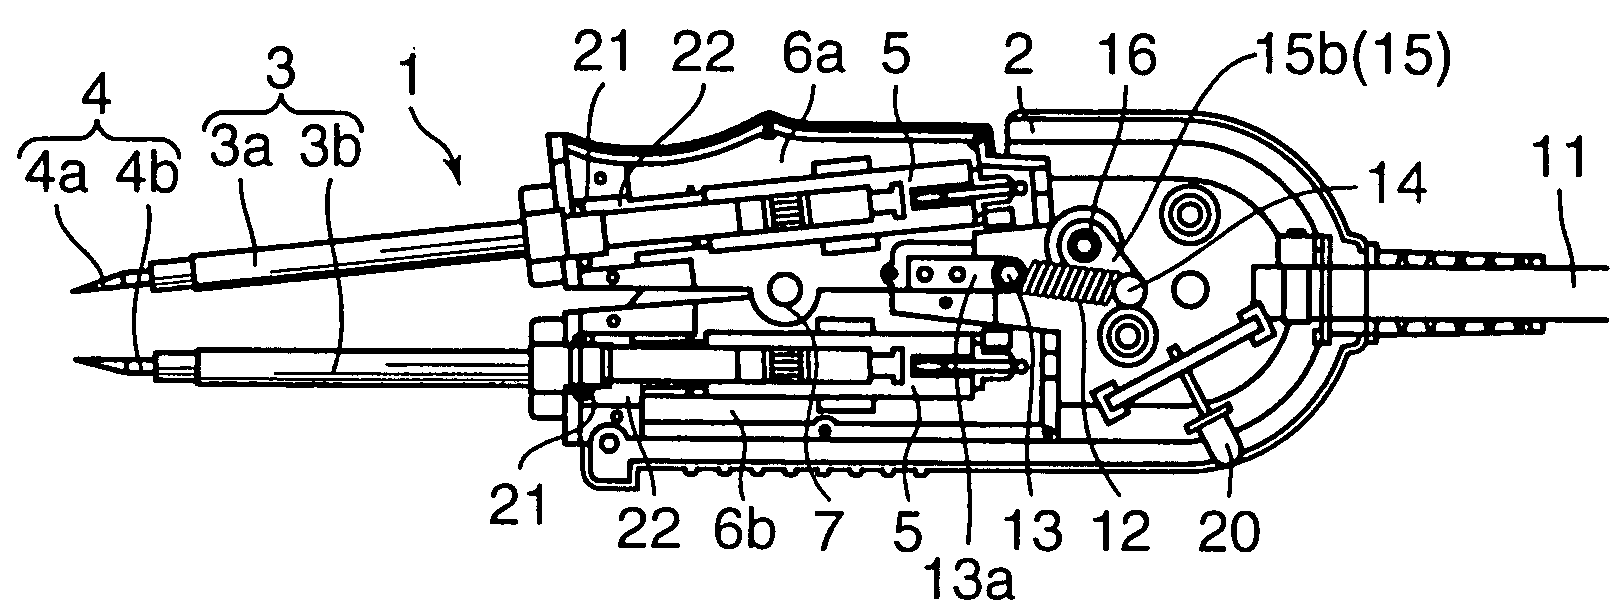 Electric part handling device